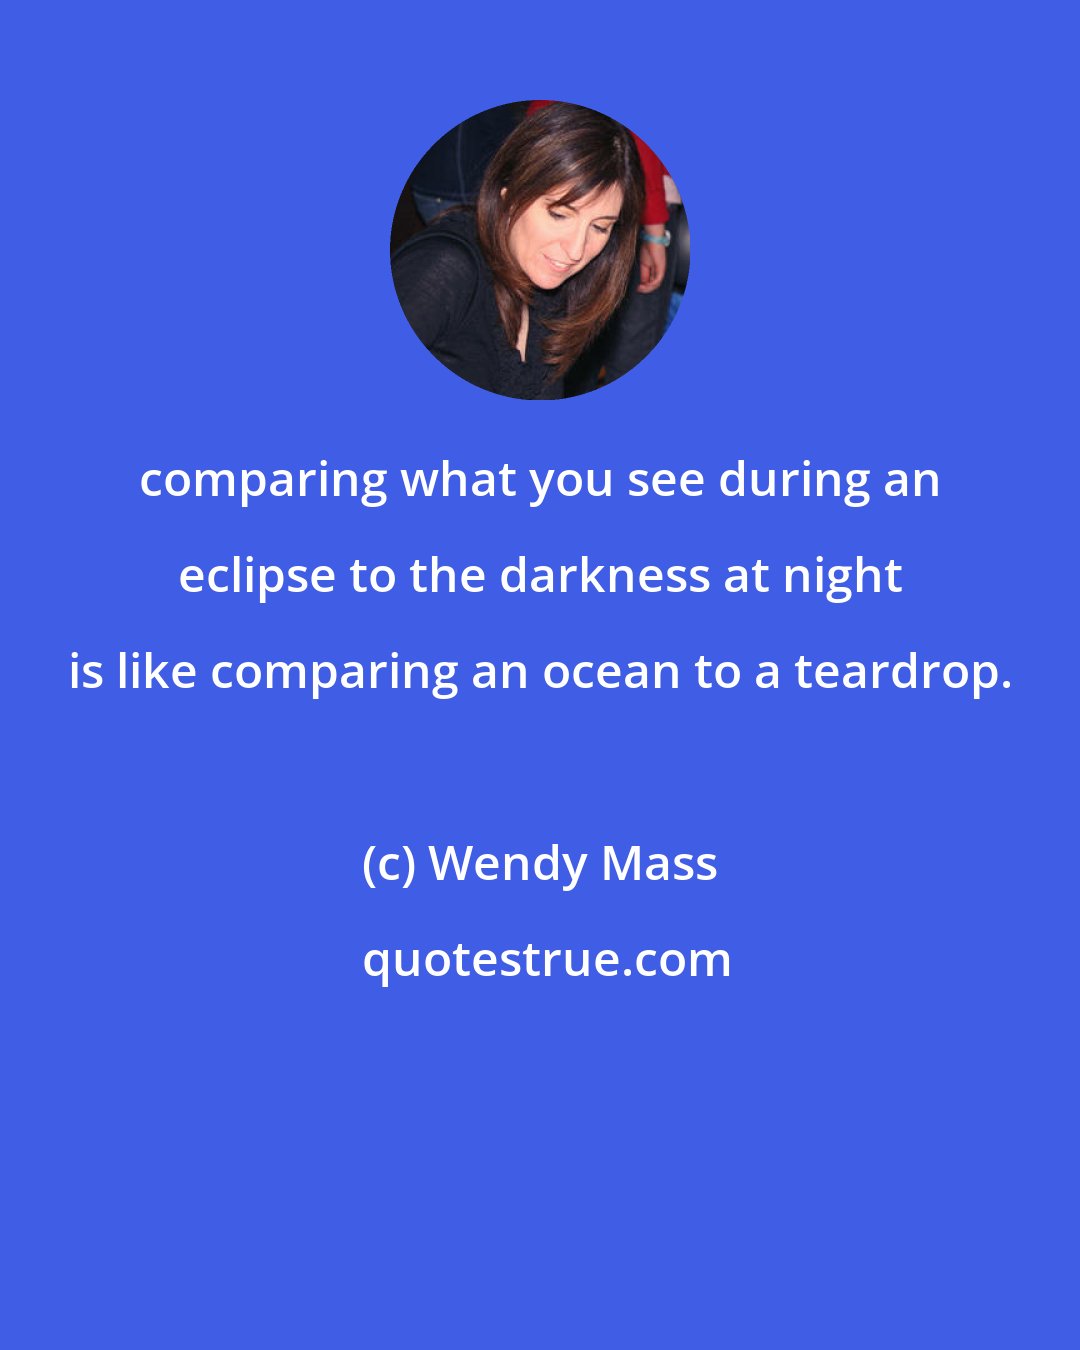 Wendy Mass: comparing what you see during an eclipse to the darkness at night is like comparing an ocean to a teardrop.